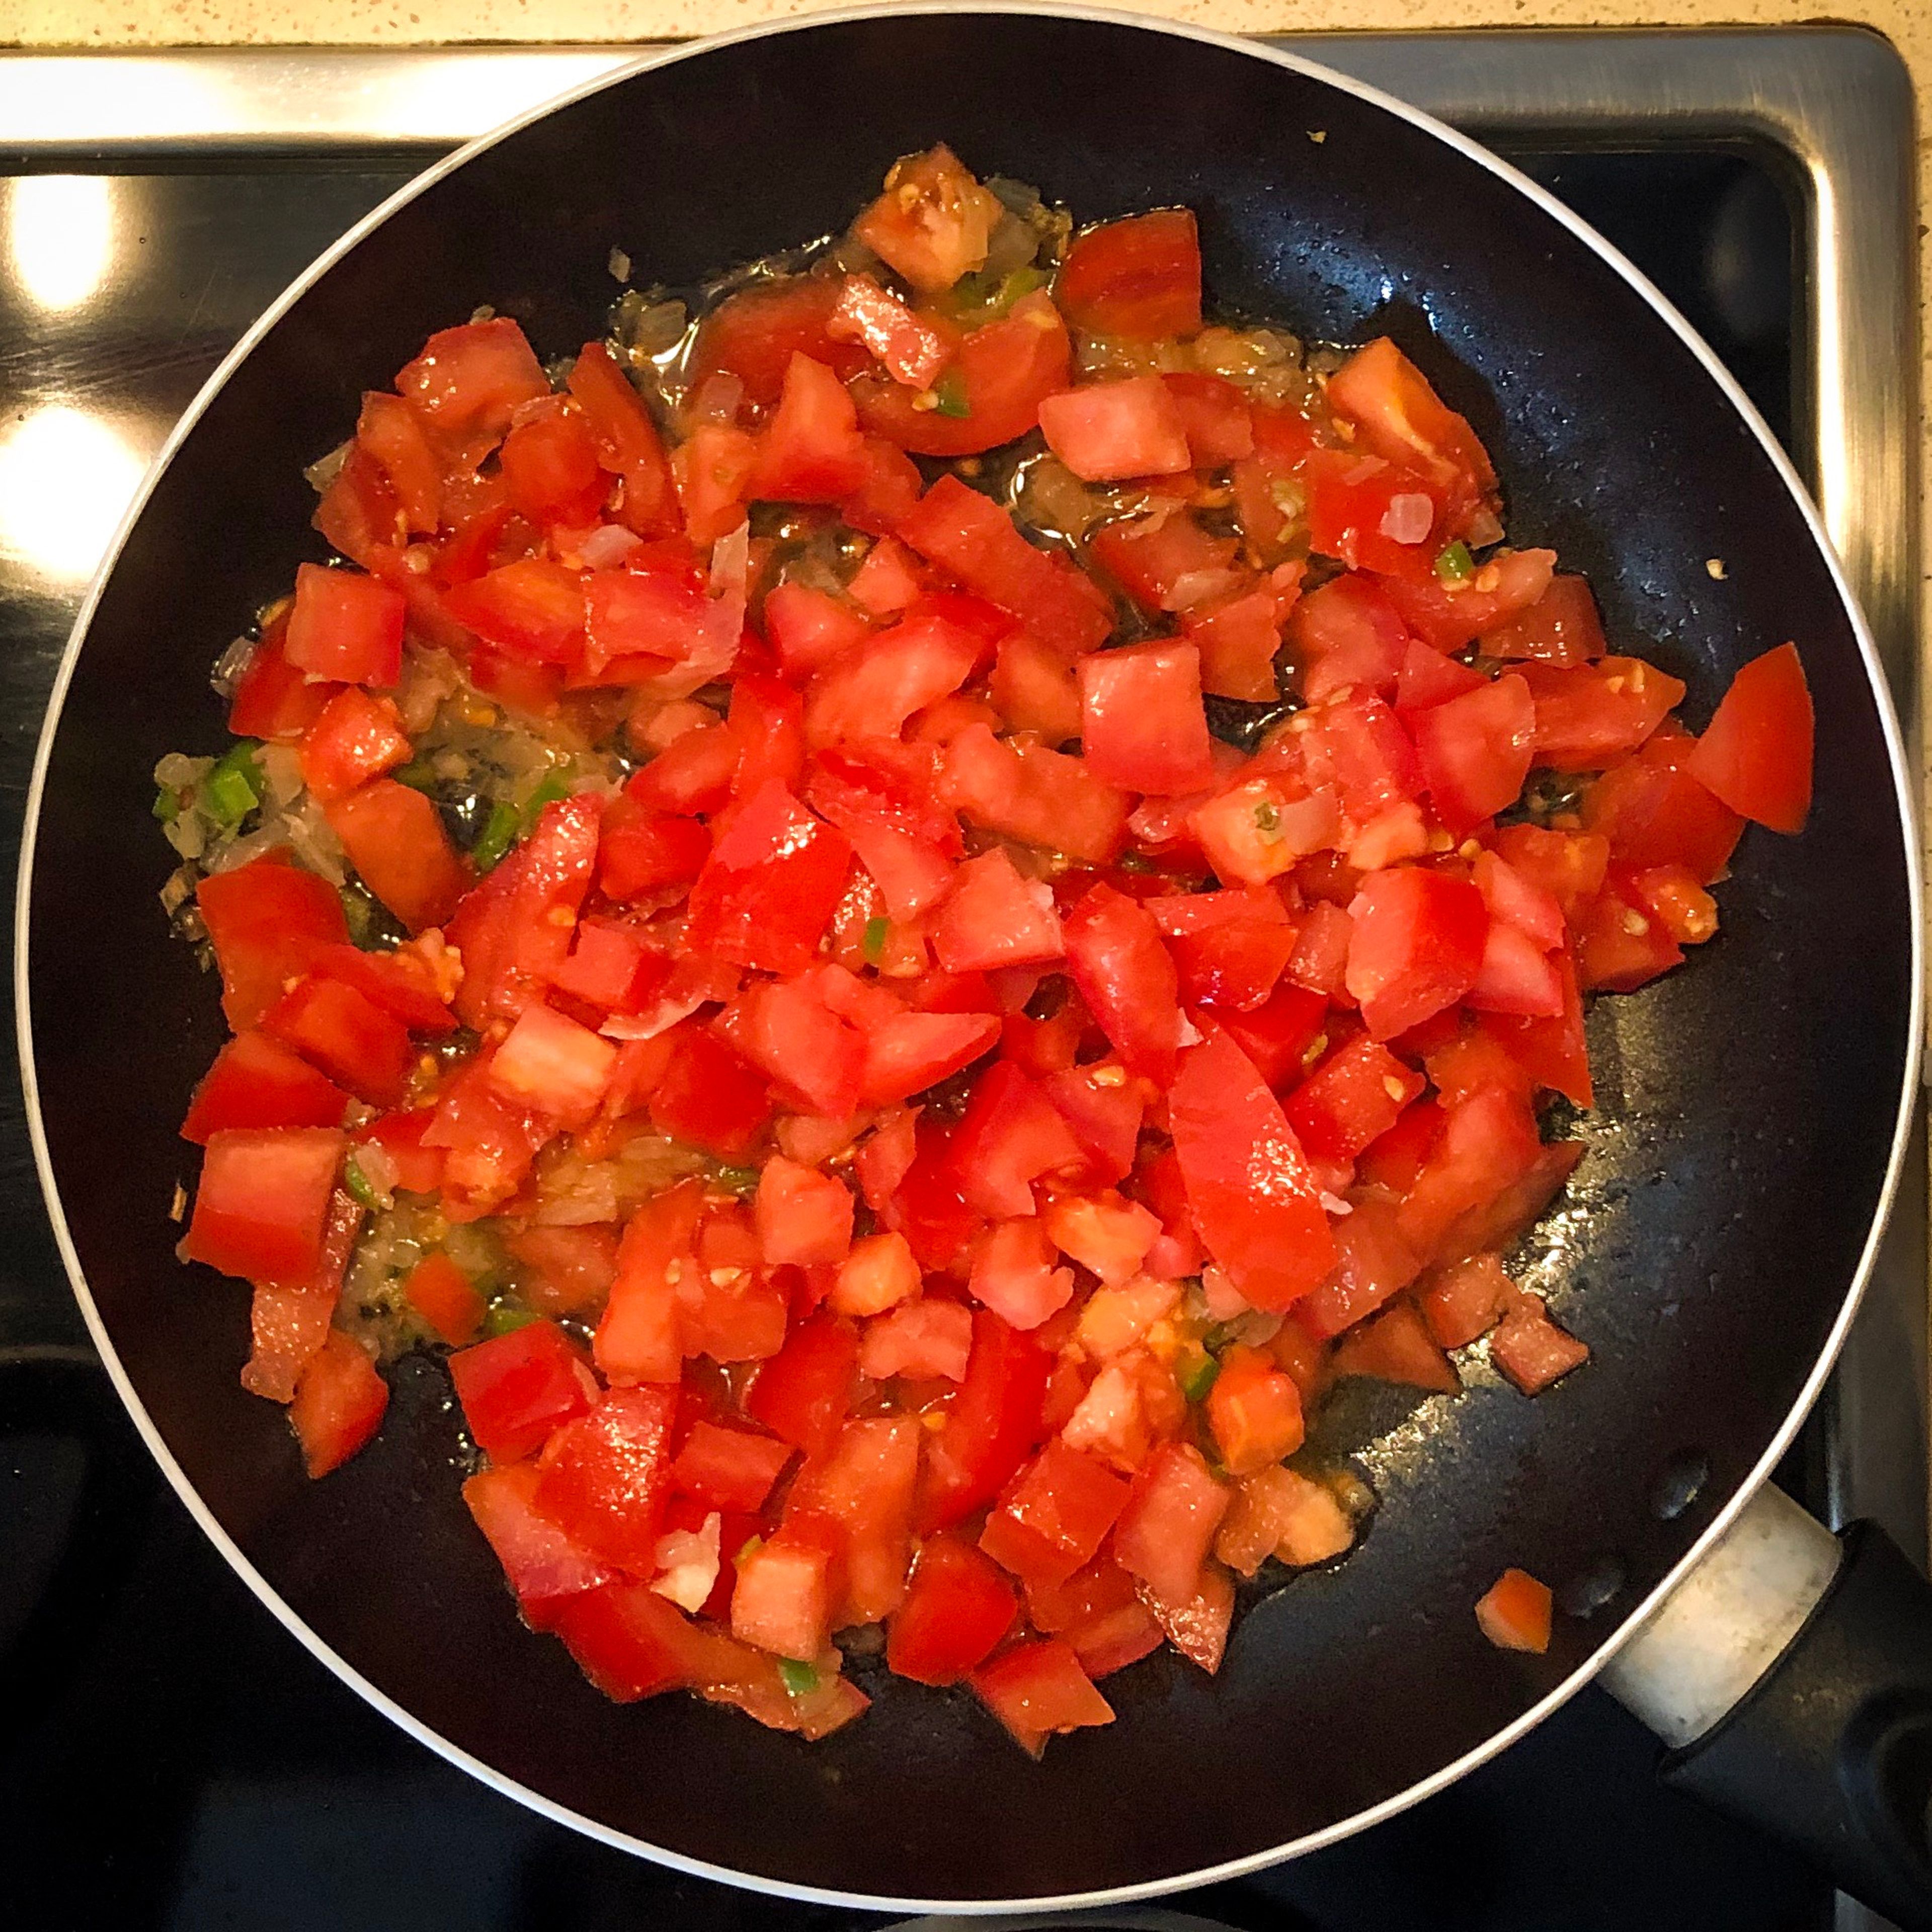 Fourth step: add your cubed tomatoes and let them cook until almost dry.